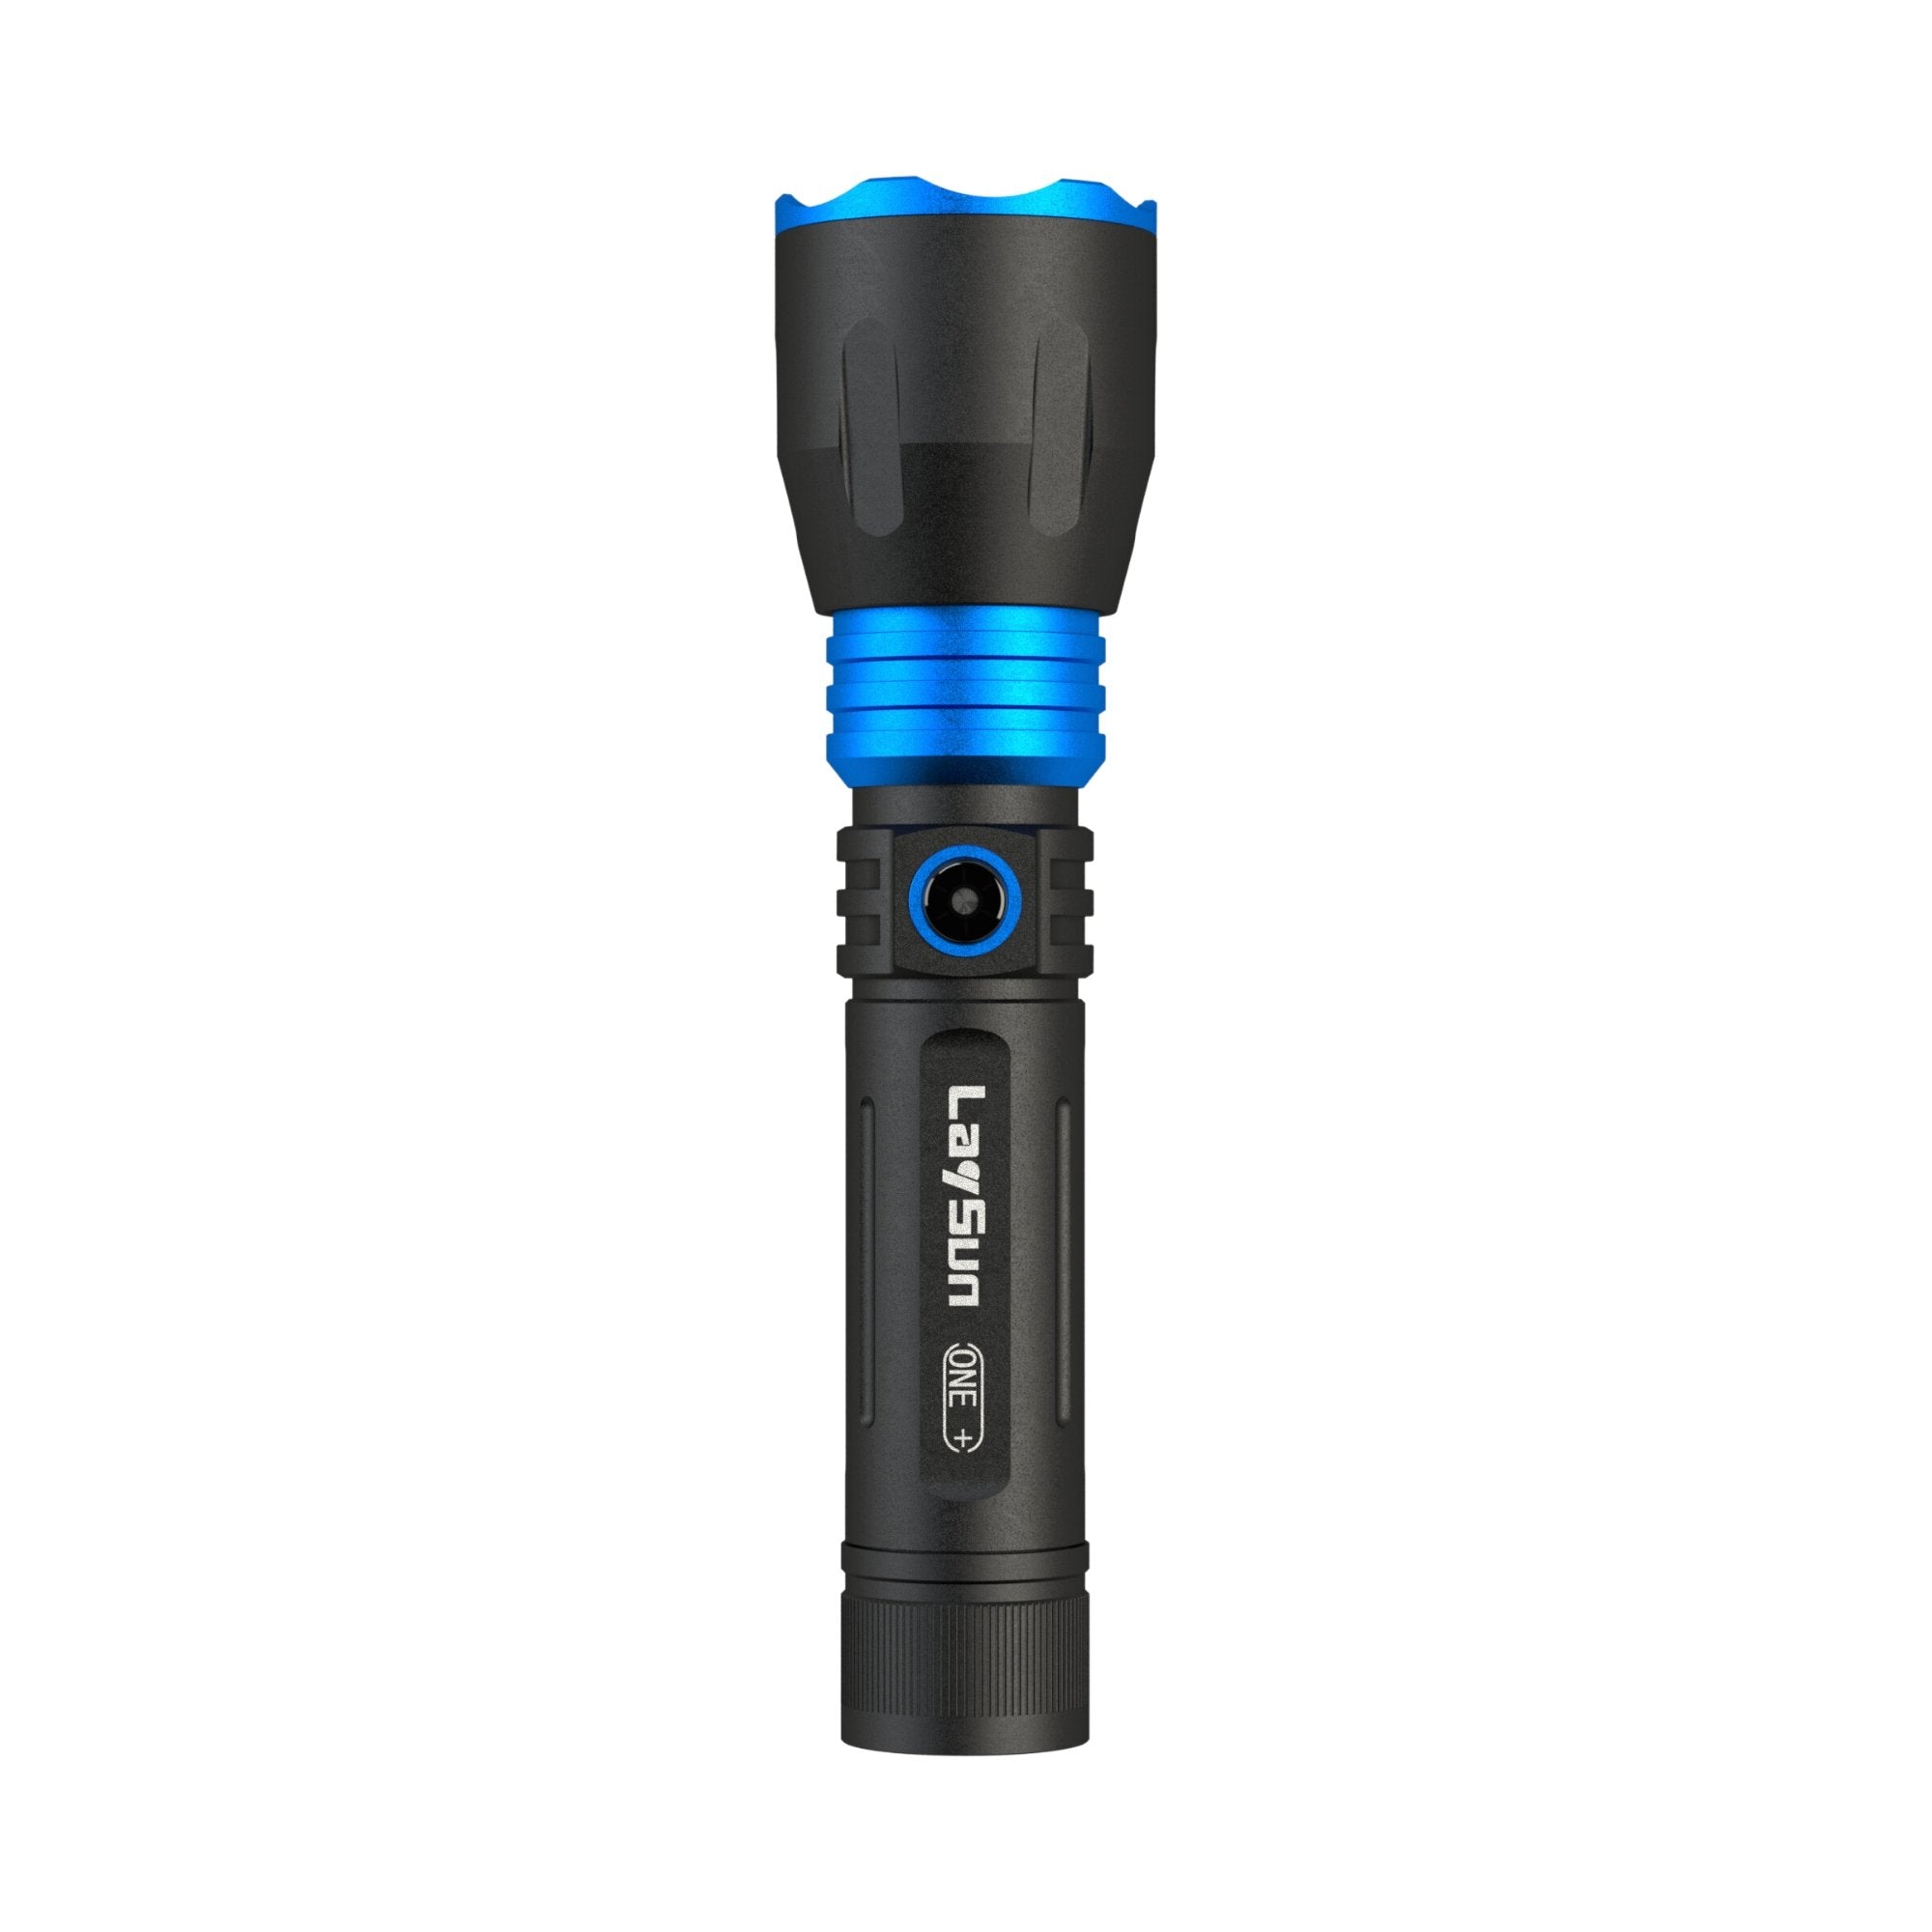 LaySun Quick Connect 400LM High Power Rechargeable LED Flashlight - LaySun Smart